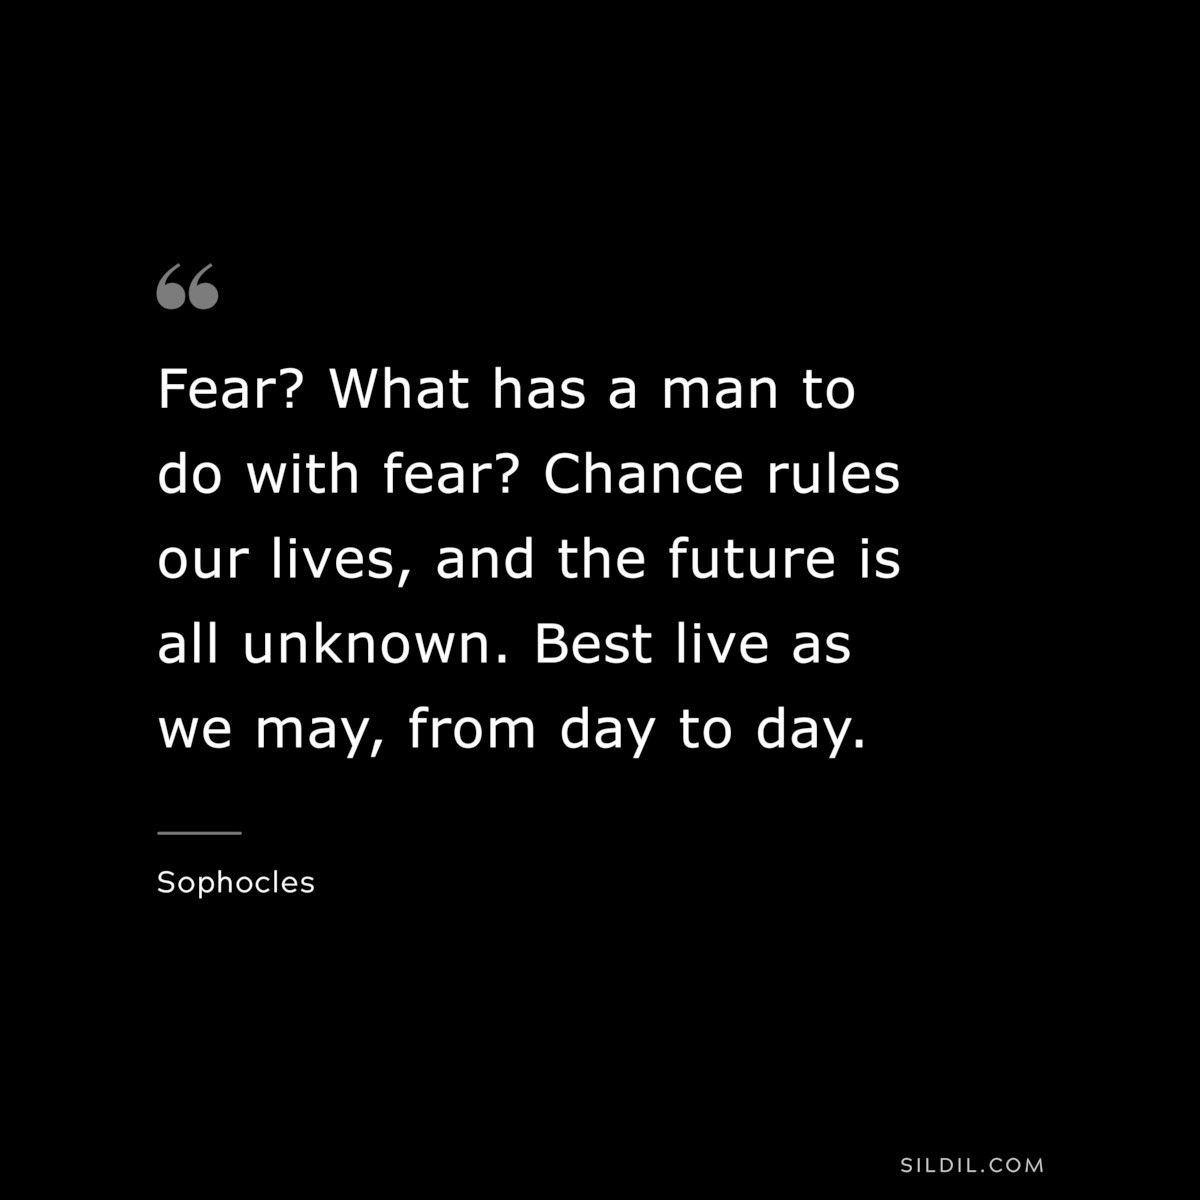 Fear? What has a man to do with fear? Chance rules our lives, and the future is all unknown. Best live as we may, from day to day. ― Sophocles